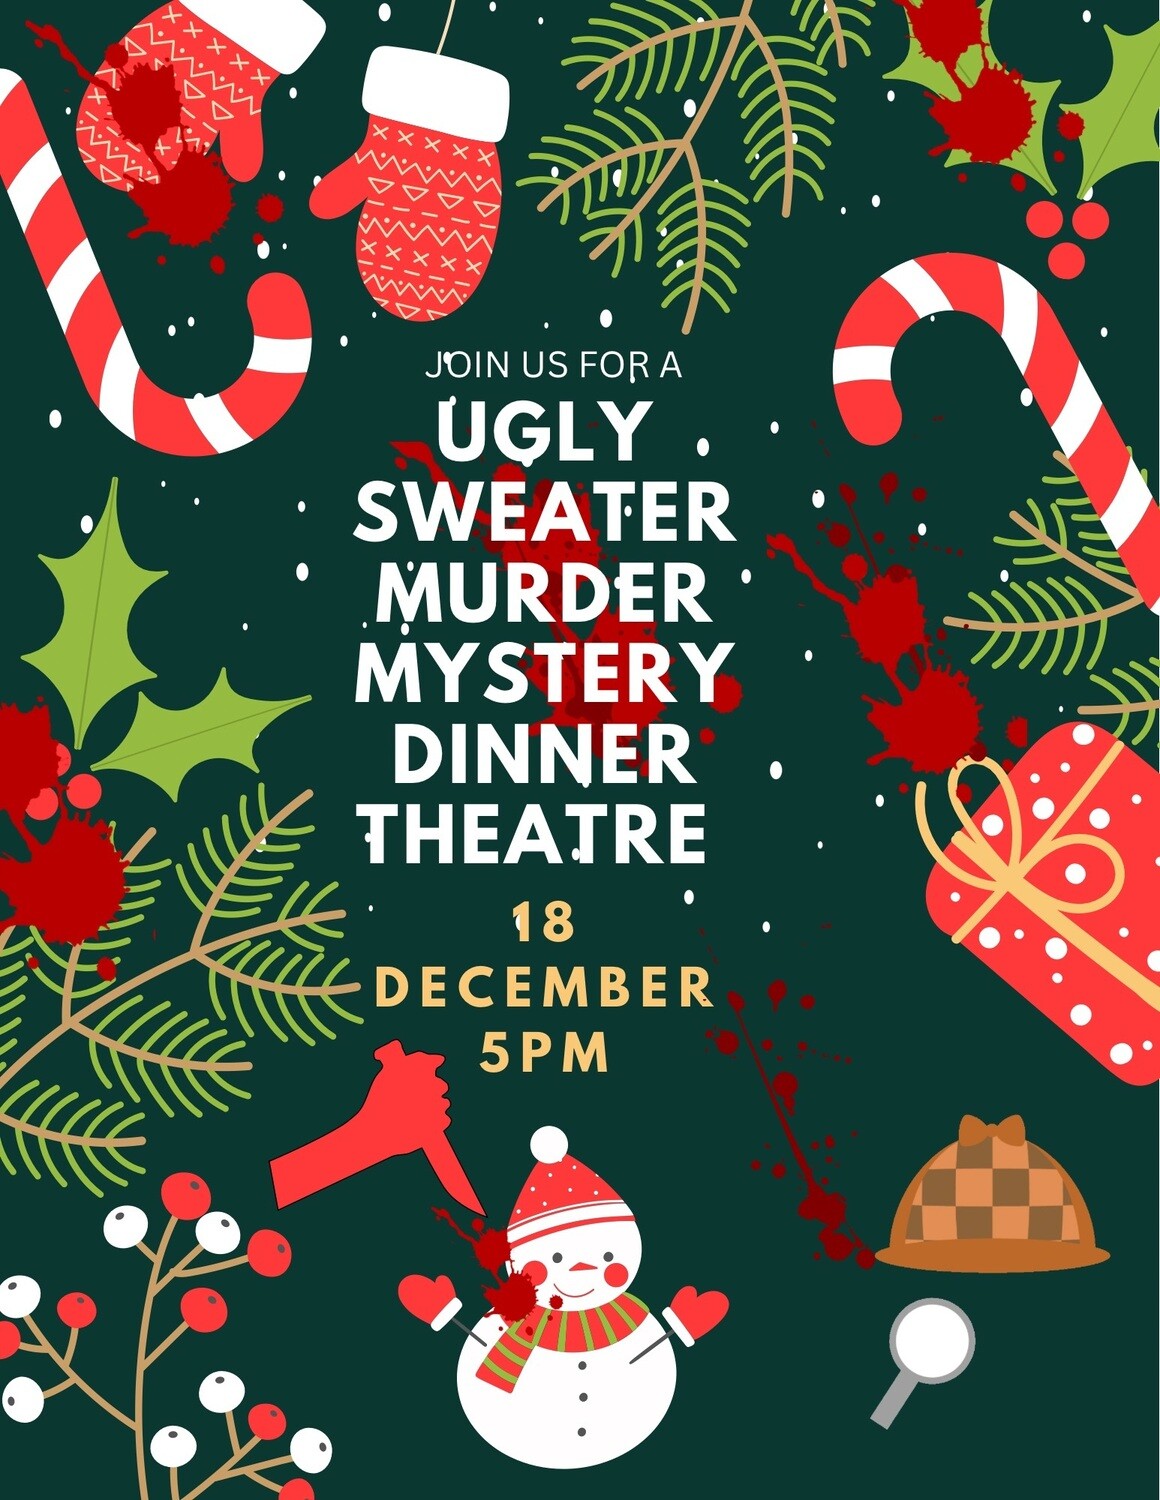 Ugly Sweater Murder Mystery Dinner Theatre December 18th